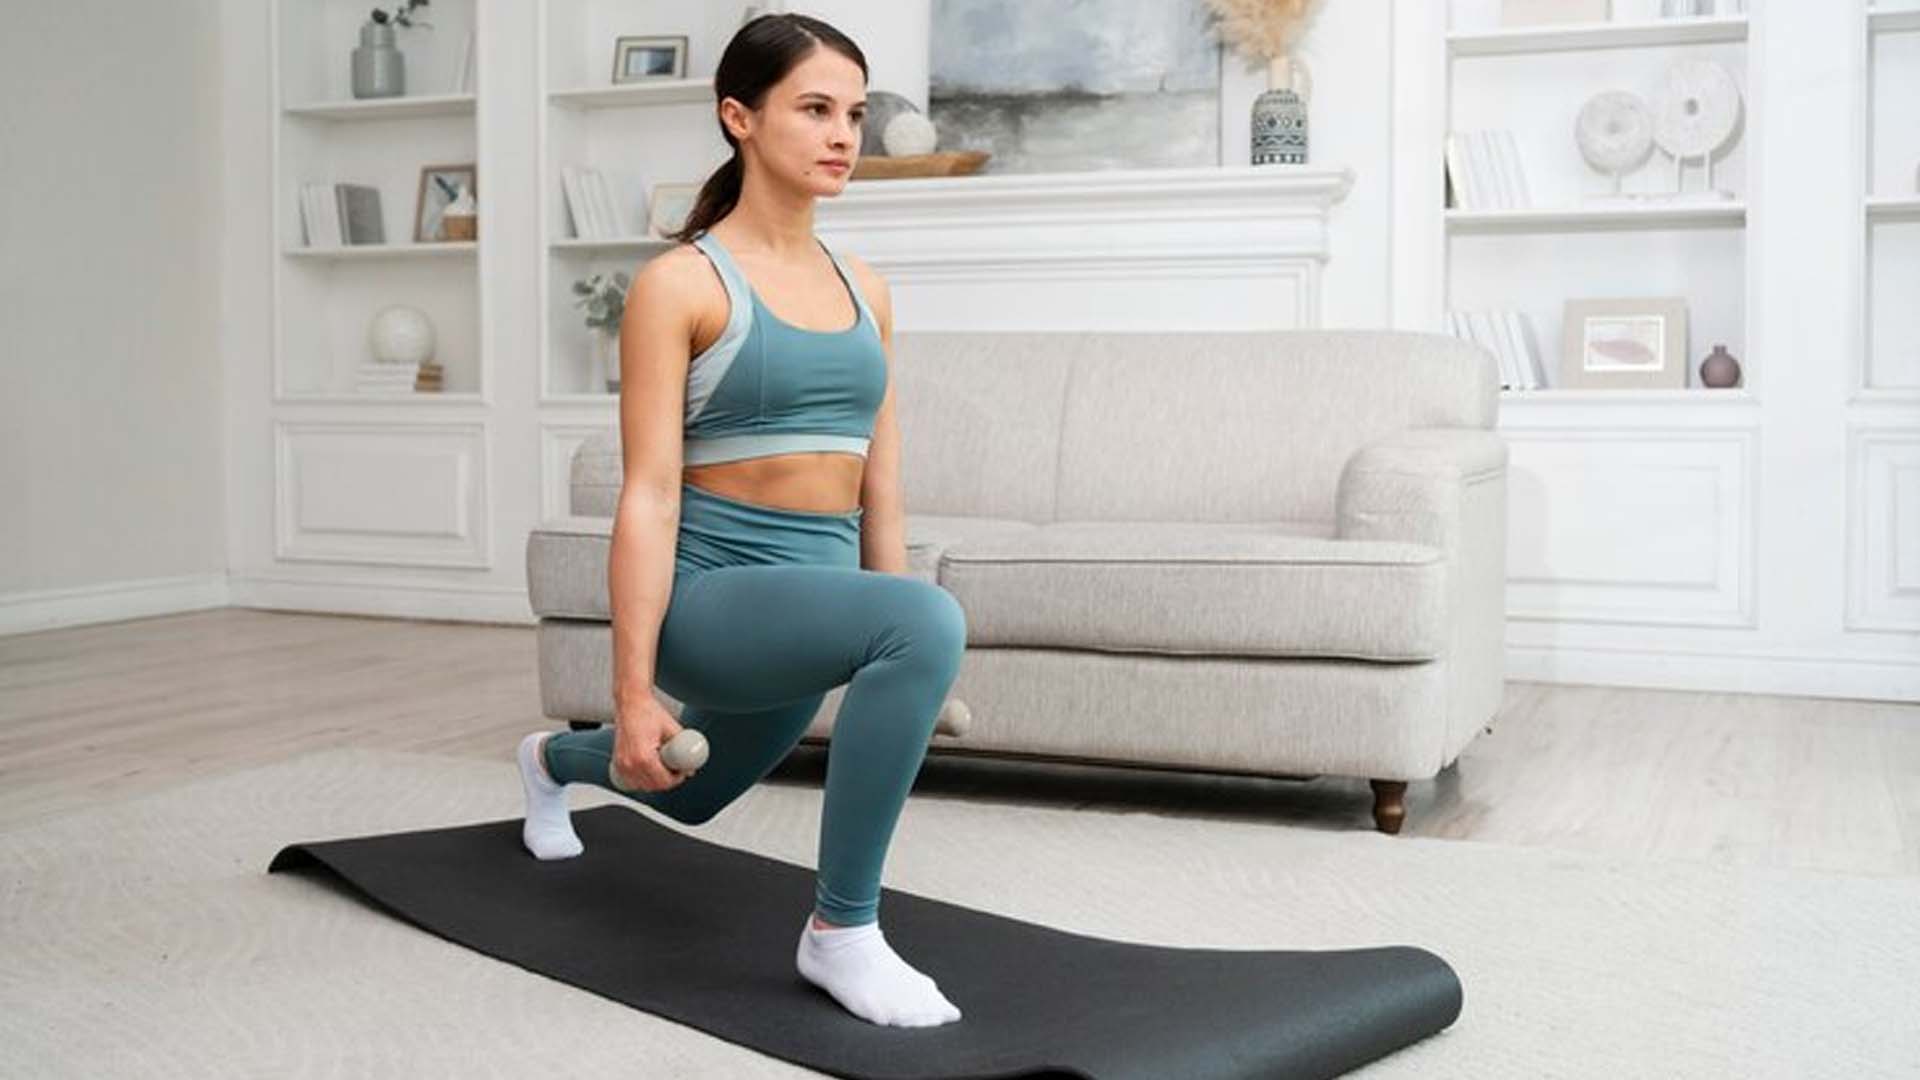 Women Exercising at home